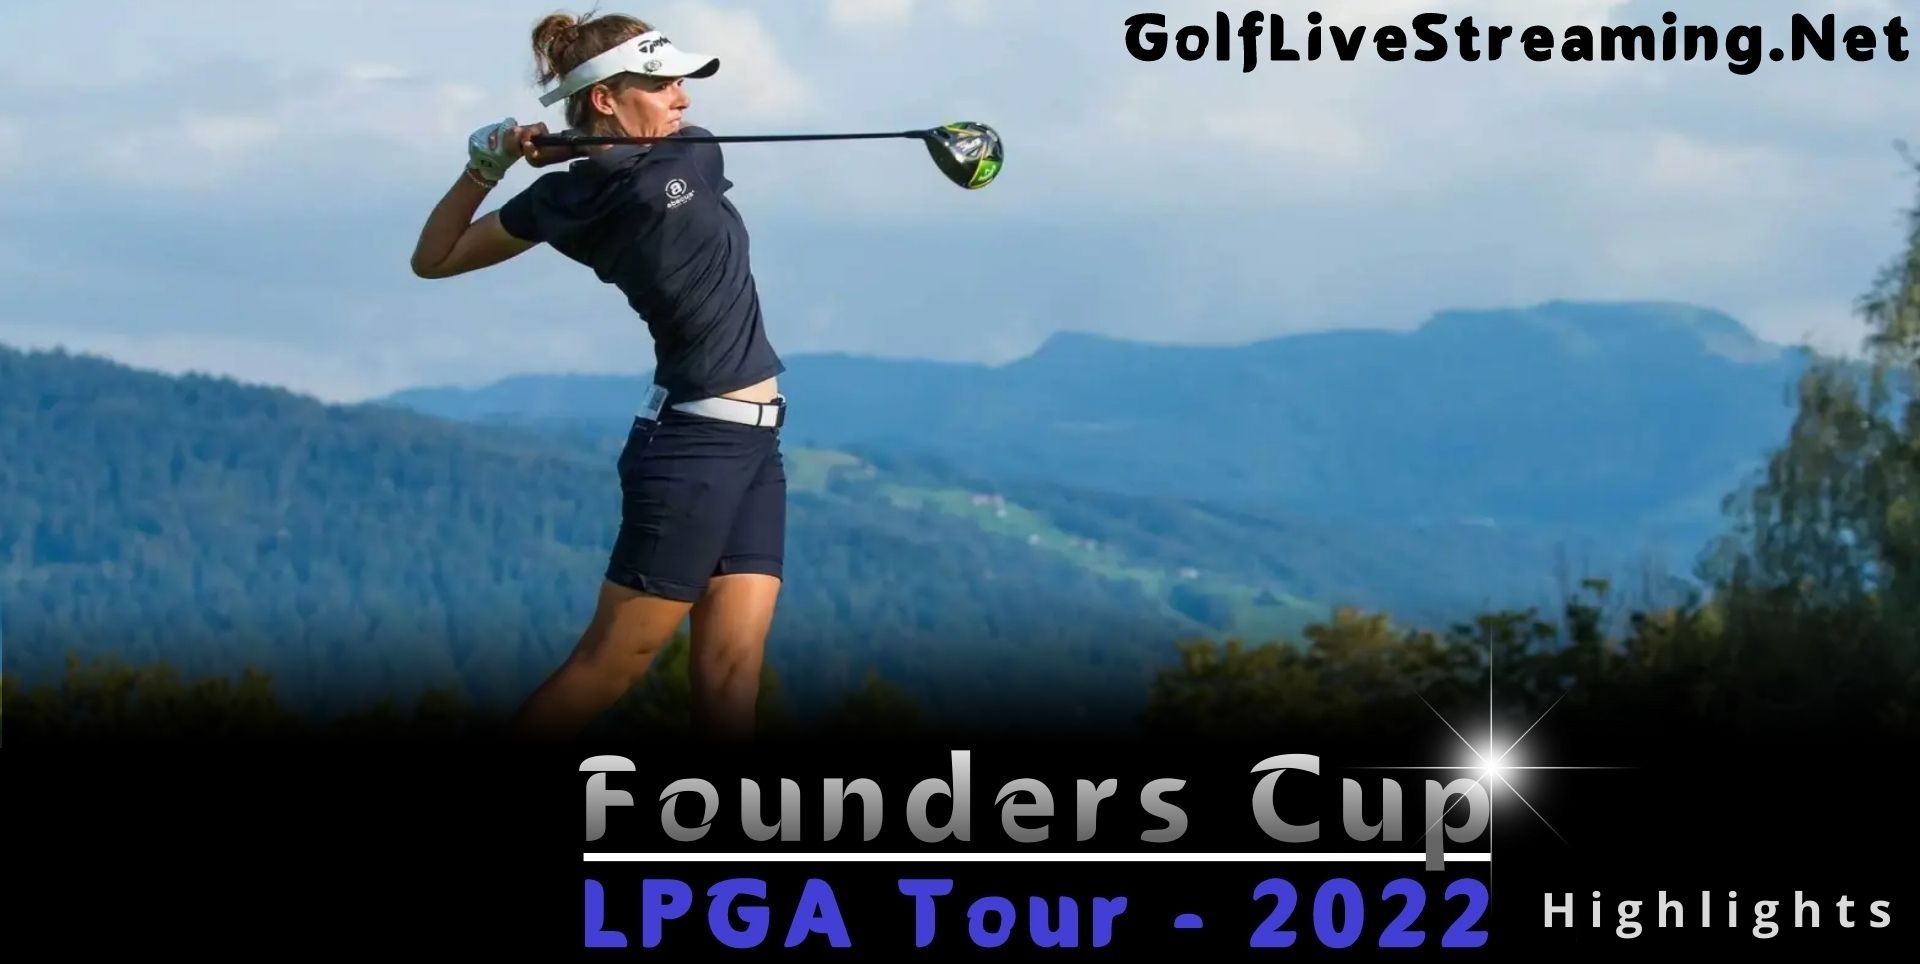 Founders Cup Round 4 Highlights 2022 LPGA Tour